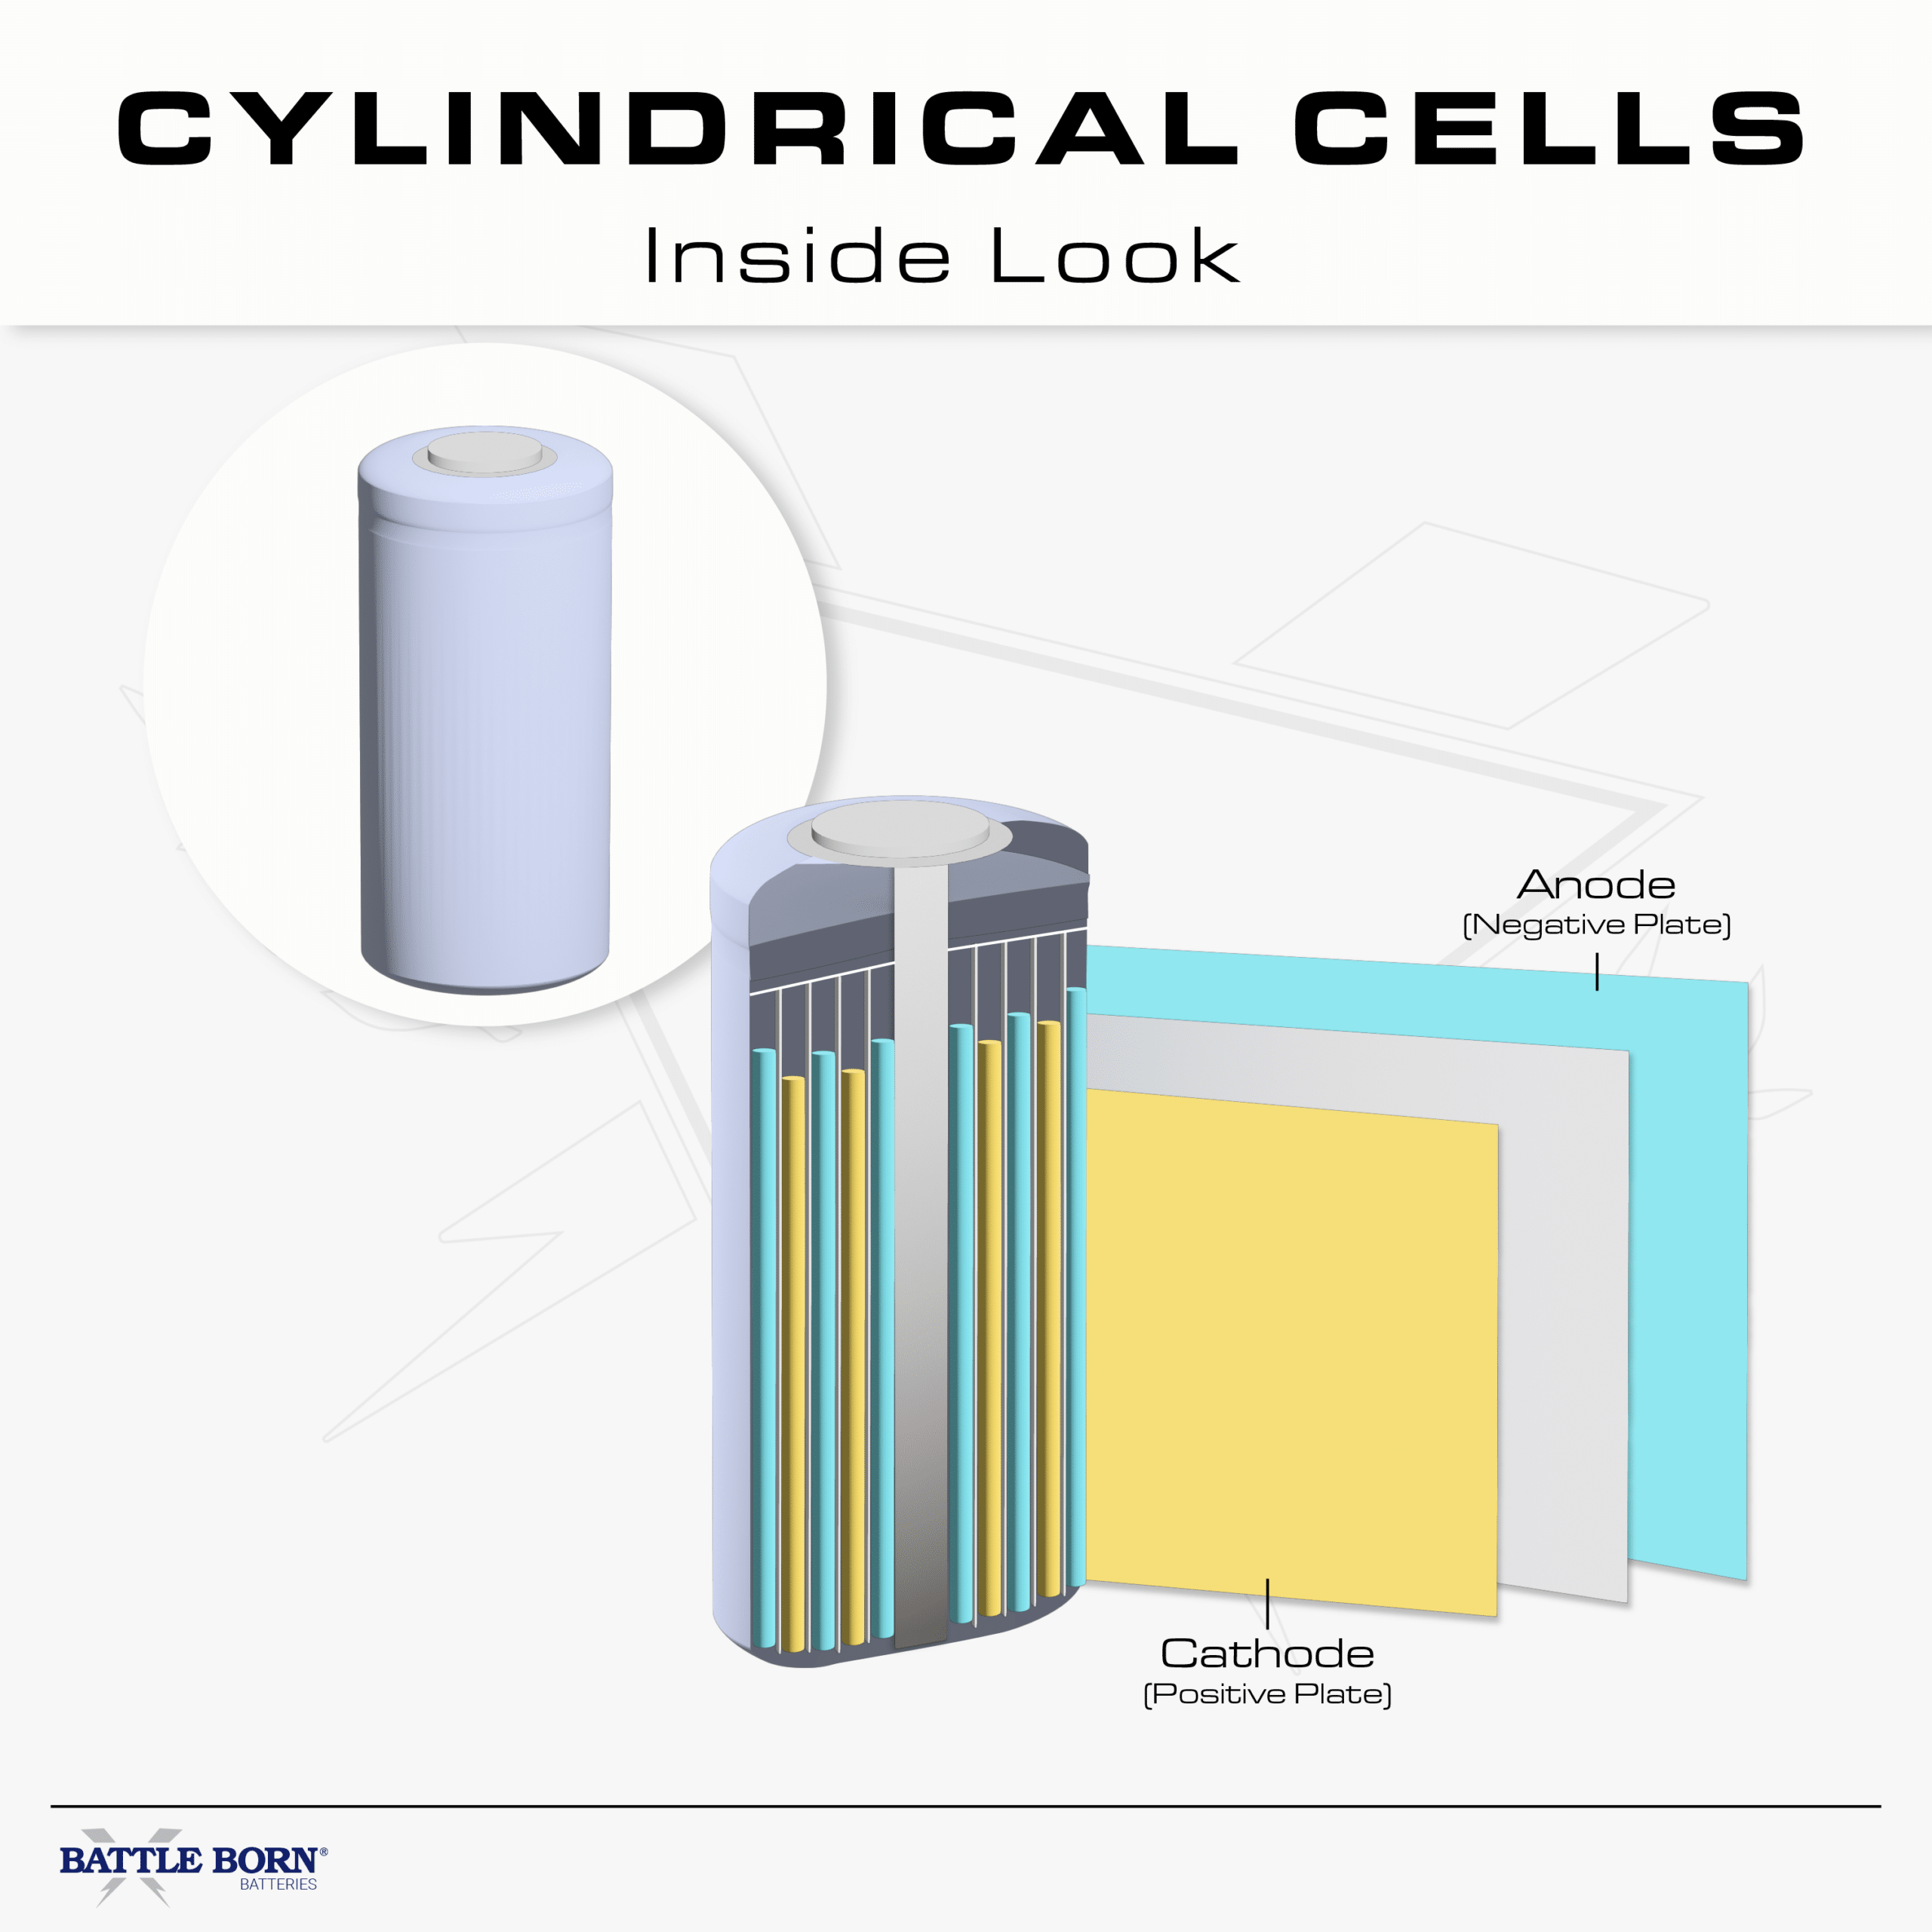 Photo is a mock up of the inside of a cylindrical cell.